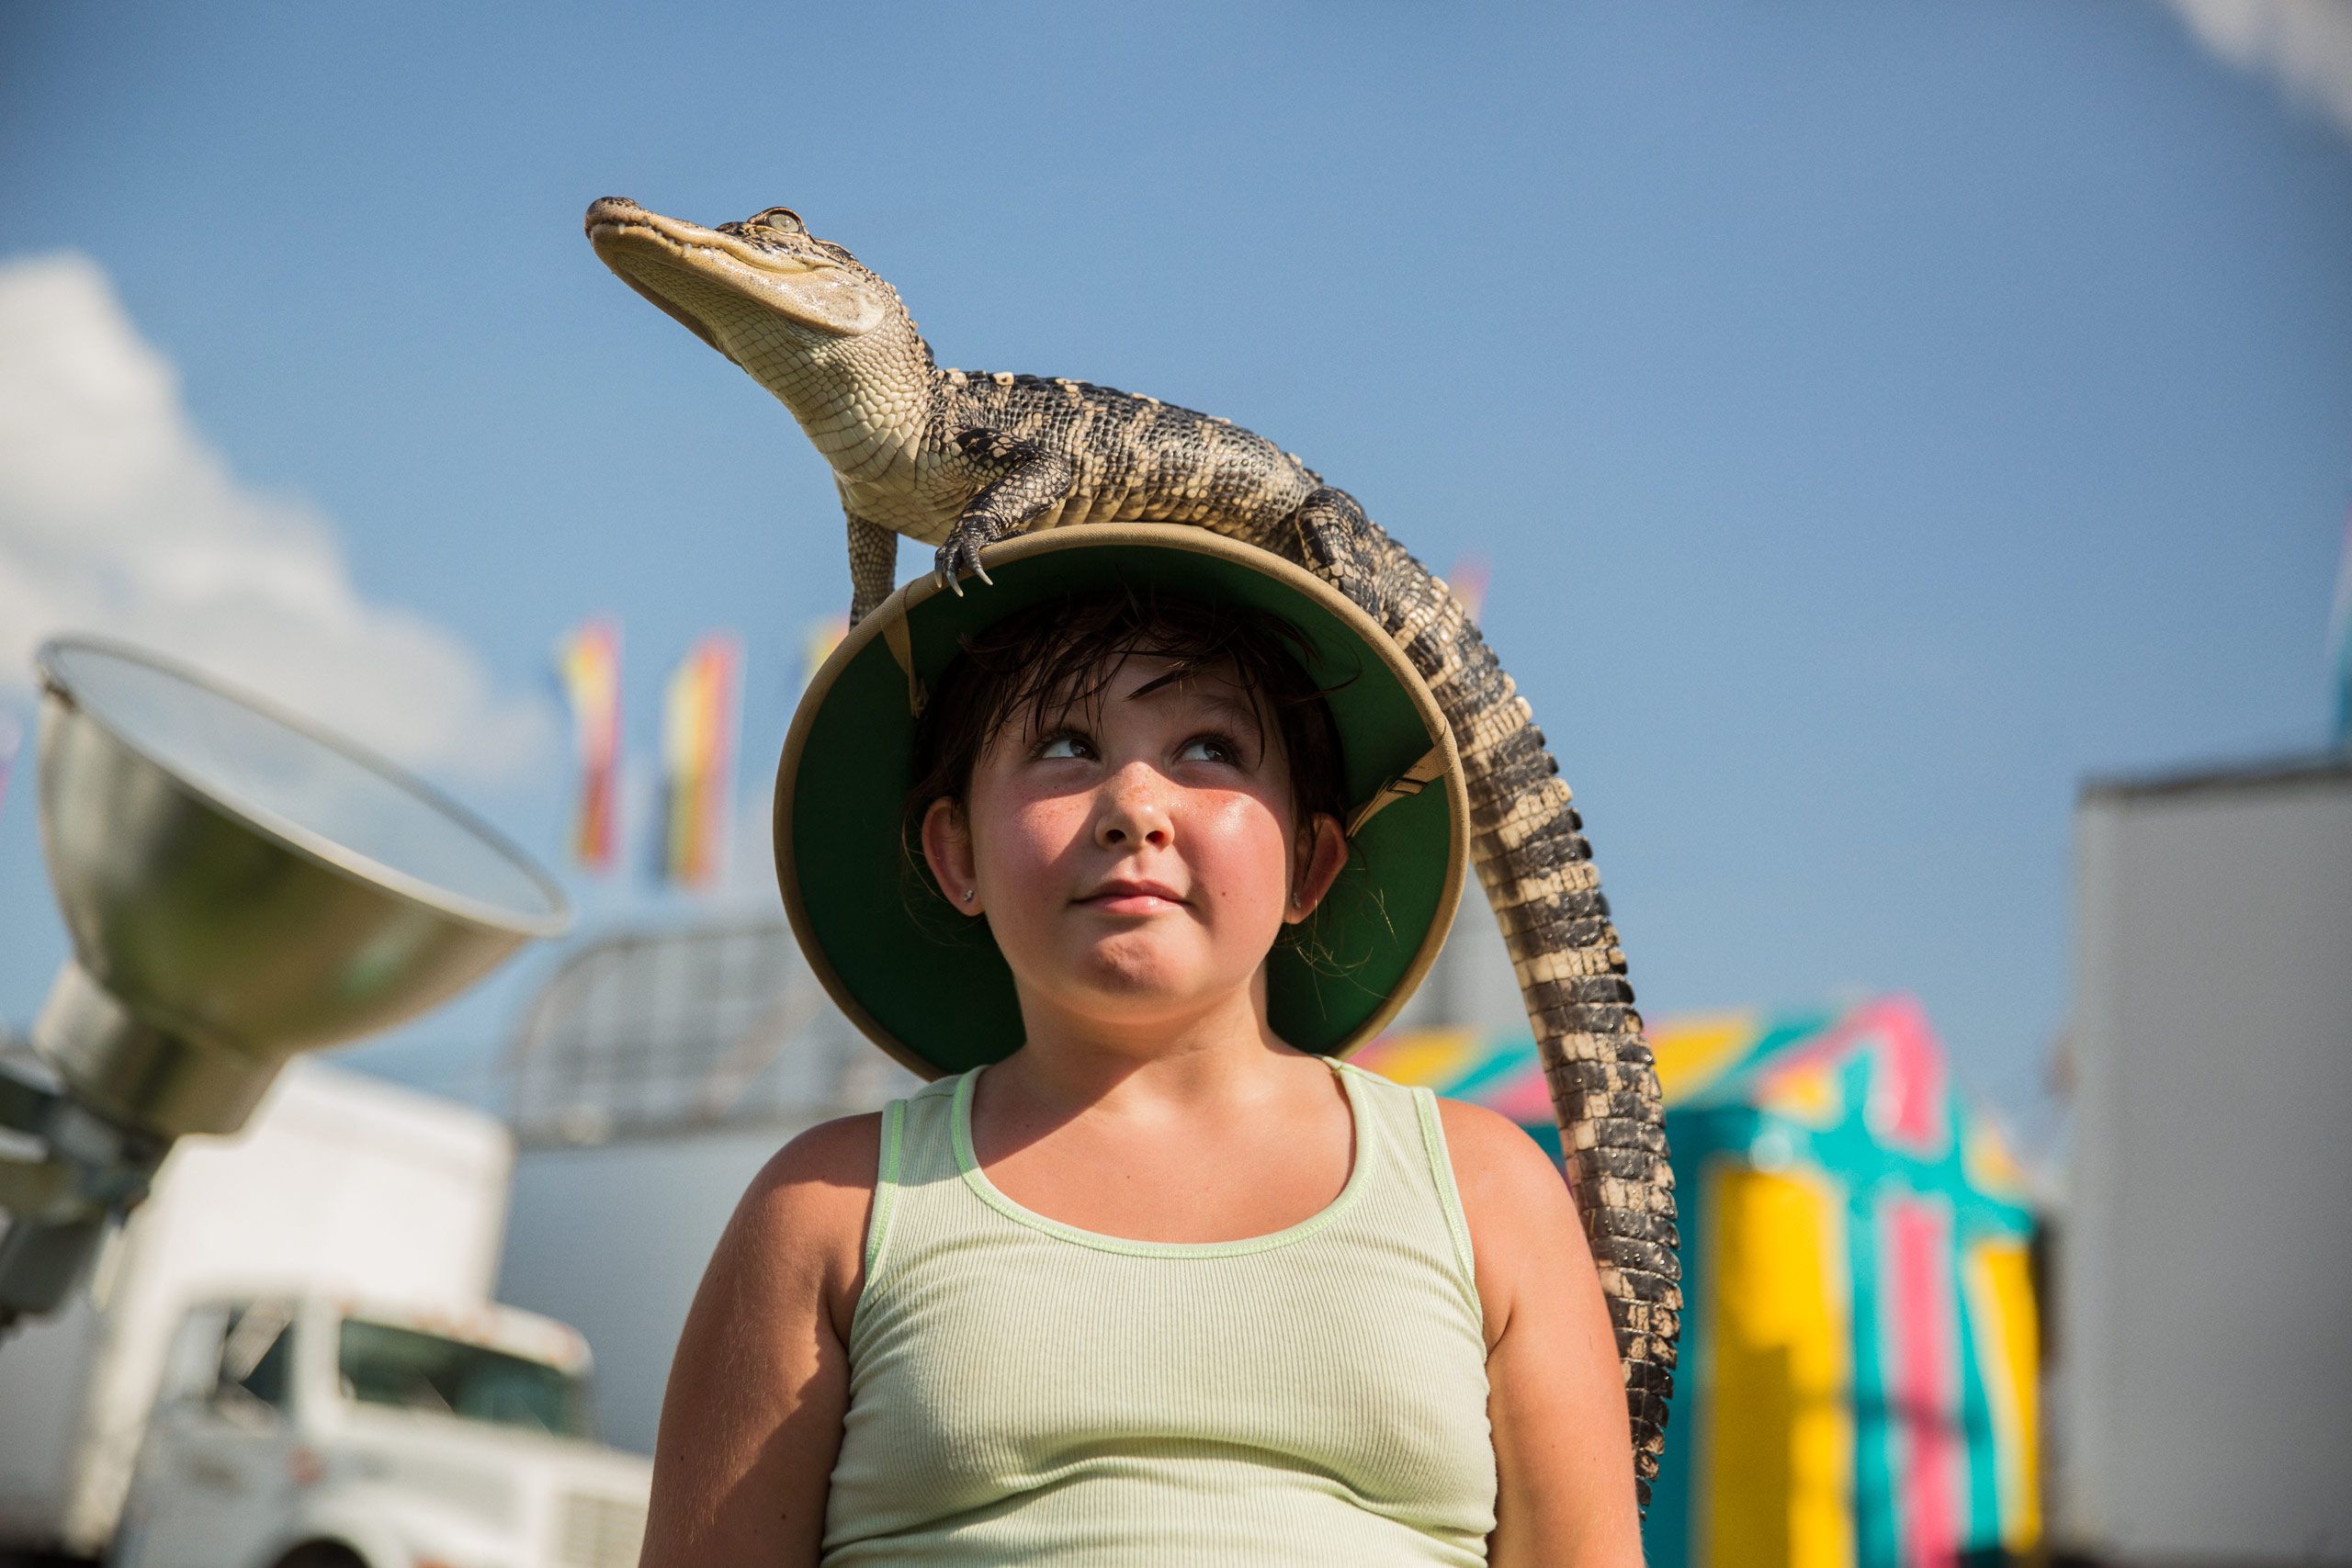 Girl With Alligator On Her Head